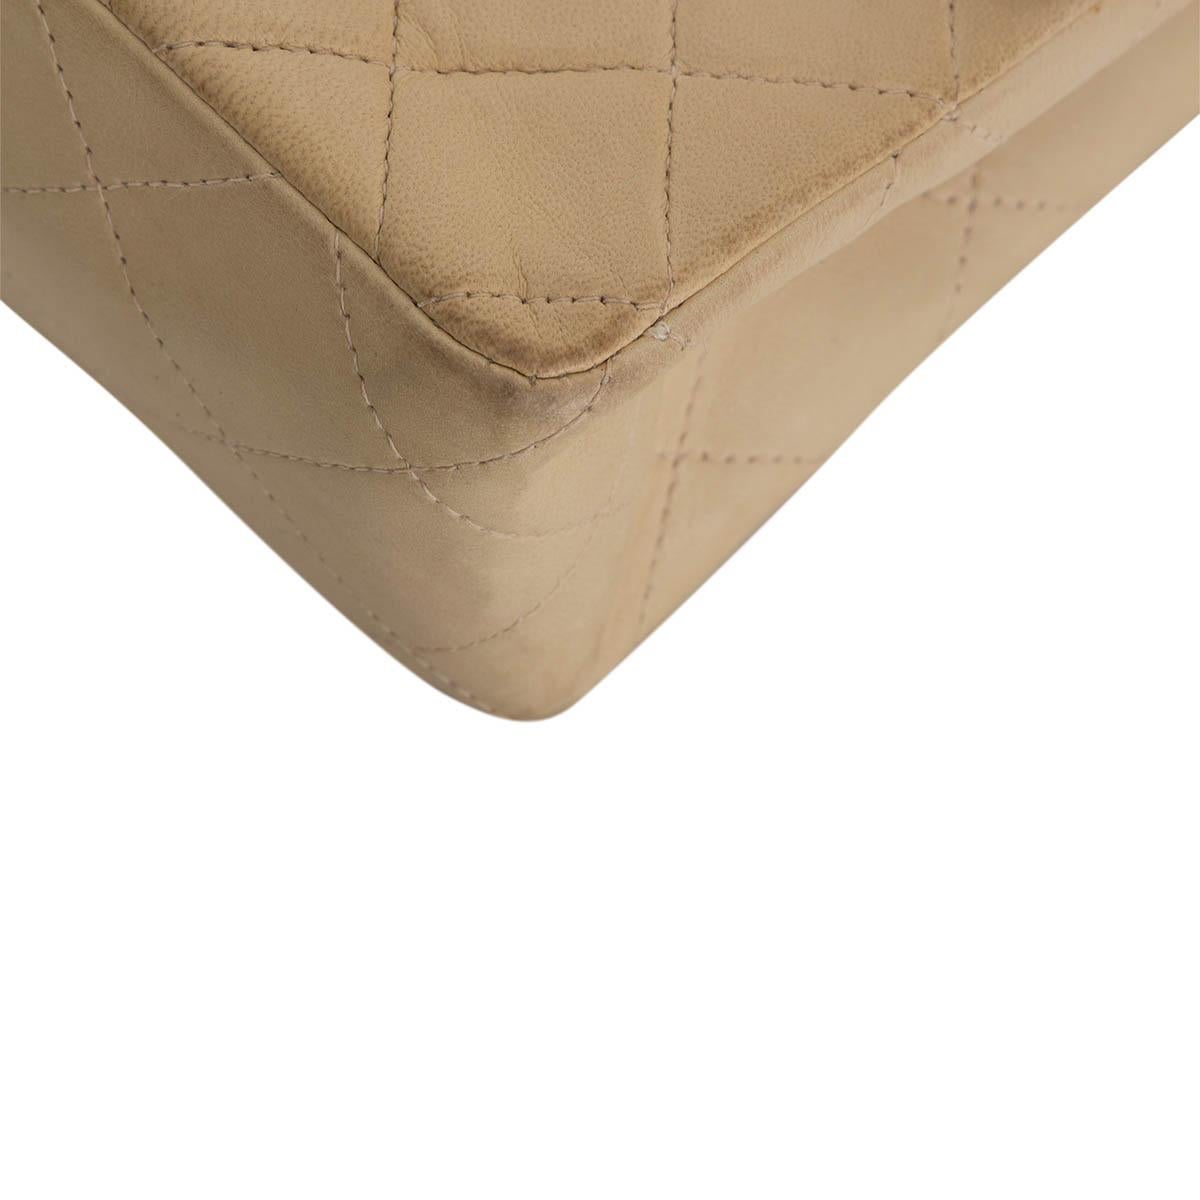 CHANEL ivory quilted leather MINI SQUARE FLAP Shoulder Bag 4